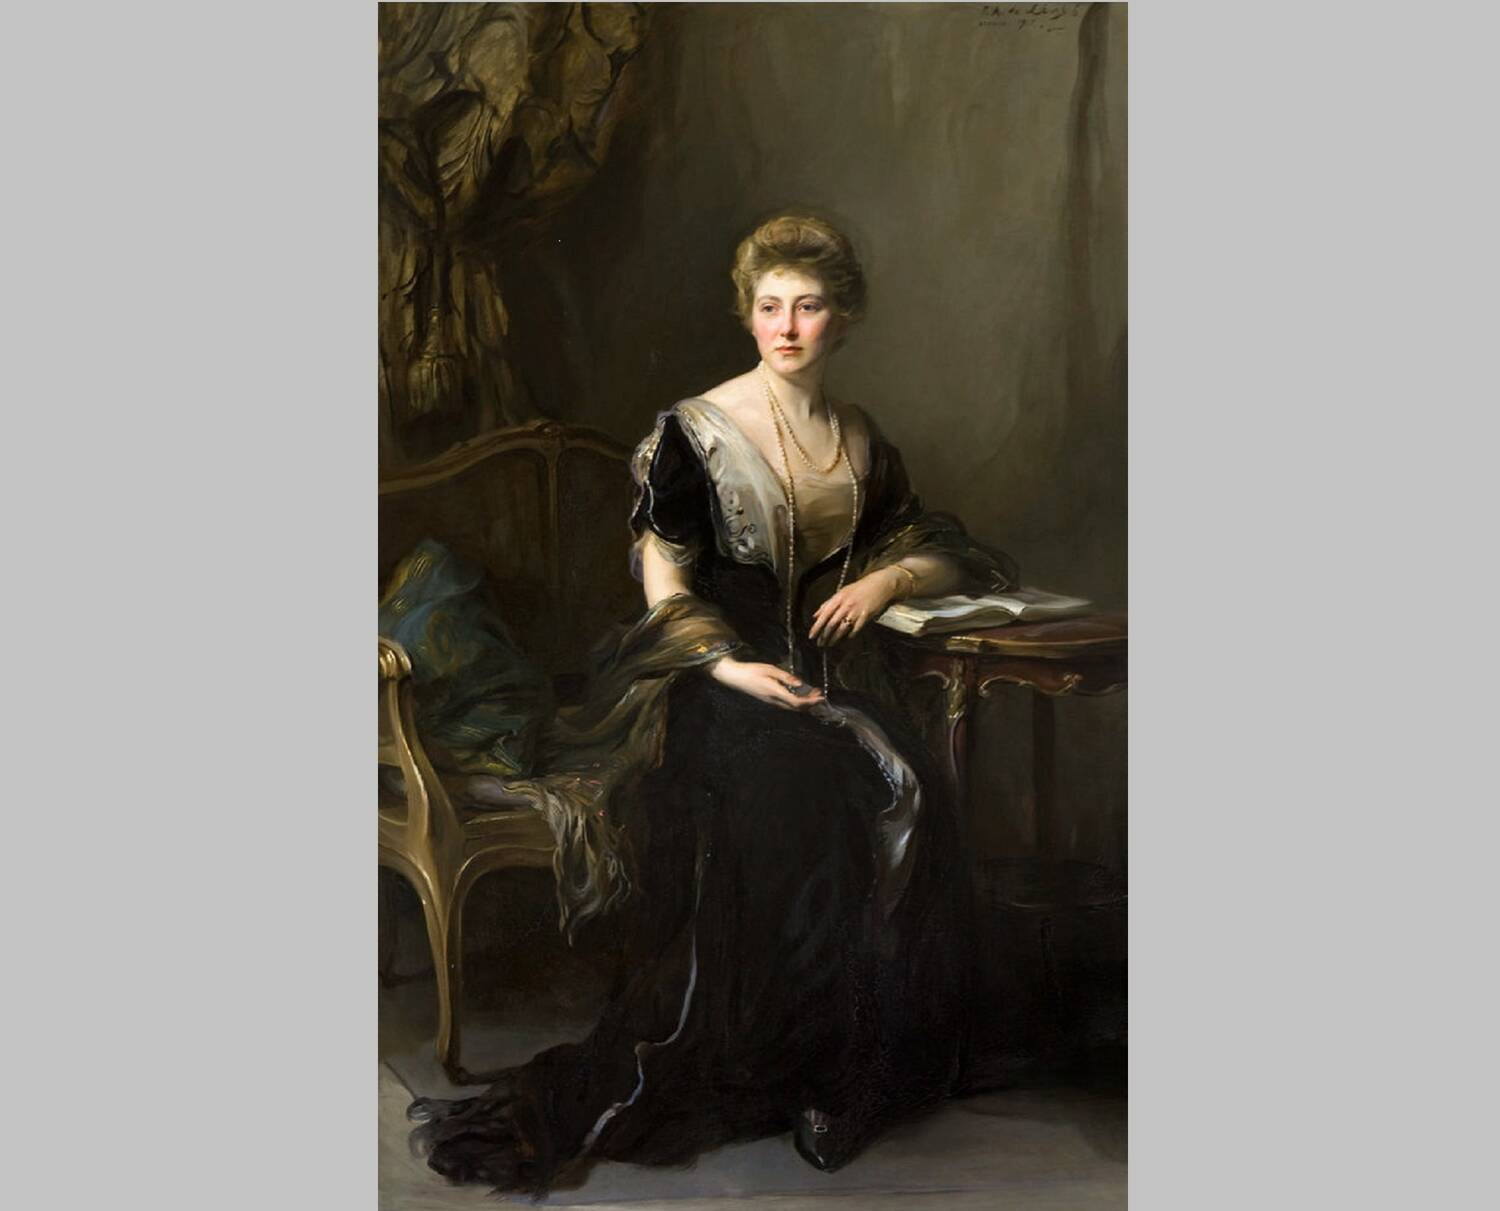 A oil painting of a young woman, dressed in a long dark dress. She is seated at a small table, and rests her arm on an open book on the table. Her hair is arranged in top of her head, and she wears a long pearl necklace.